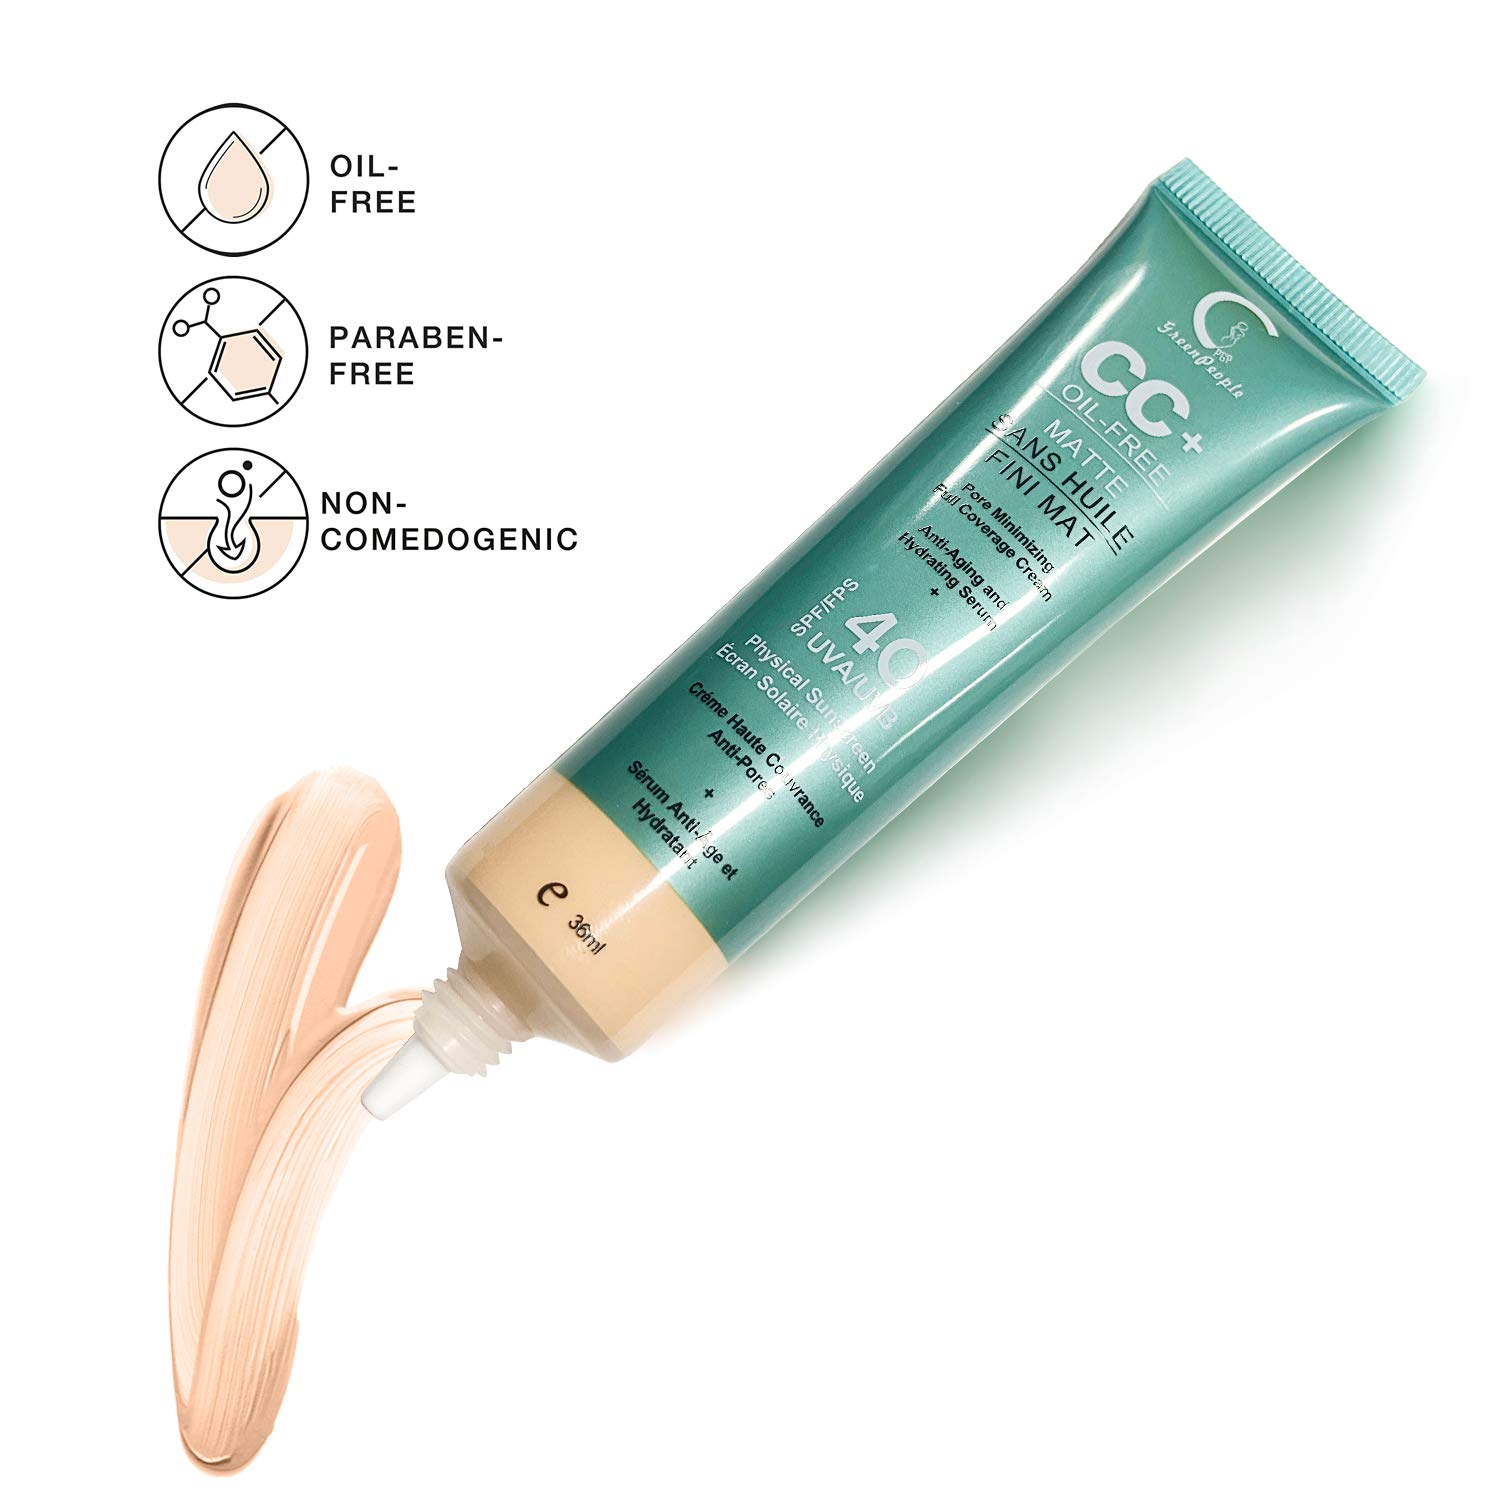  GPGP GreenPeople CC Cream Foundation Concealer with Sunscreen SPF 40+, Complexion Rescue Tinted Hydrating Gel Cream - 1.21 Ounce (Natural)